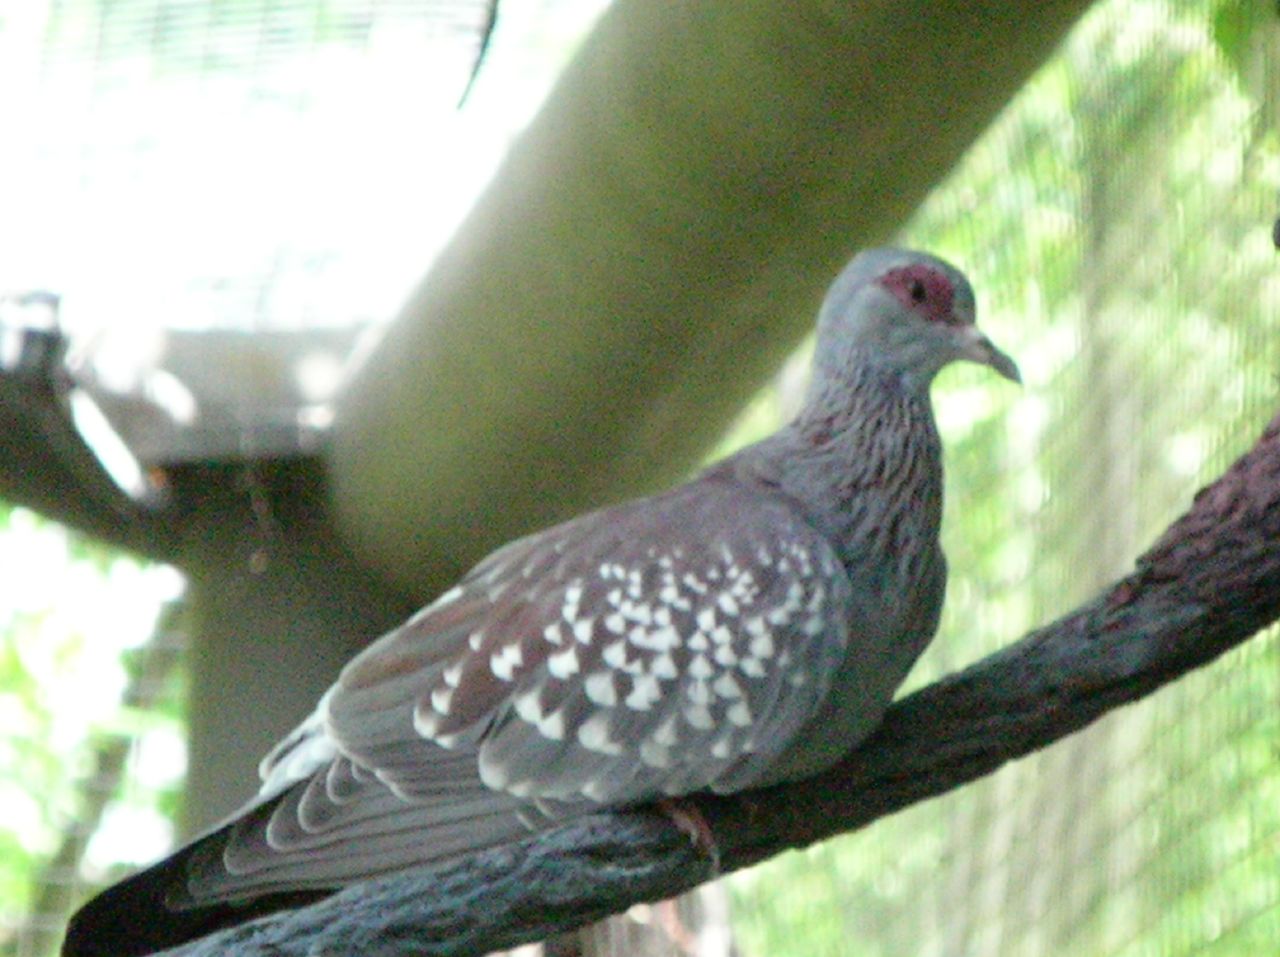 a small bird on a tree nch inside an enclosure